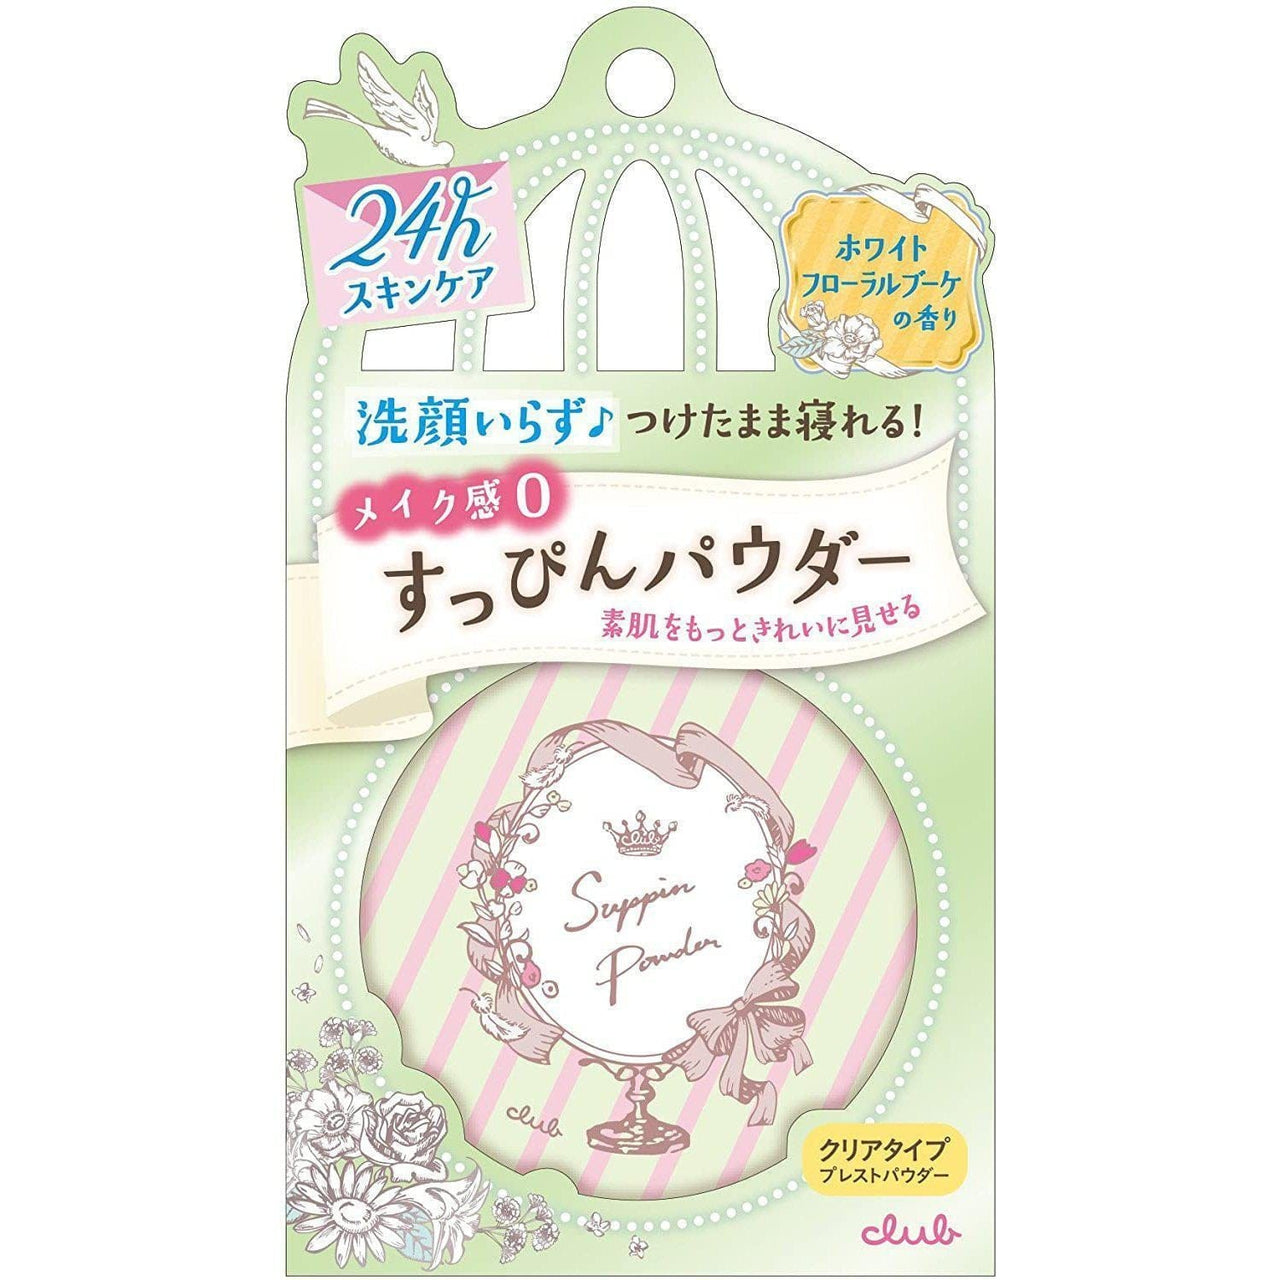 CLUB_Suppin Powder White Floral Bouquet Scent_Cosmetic World